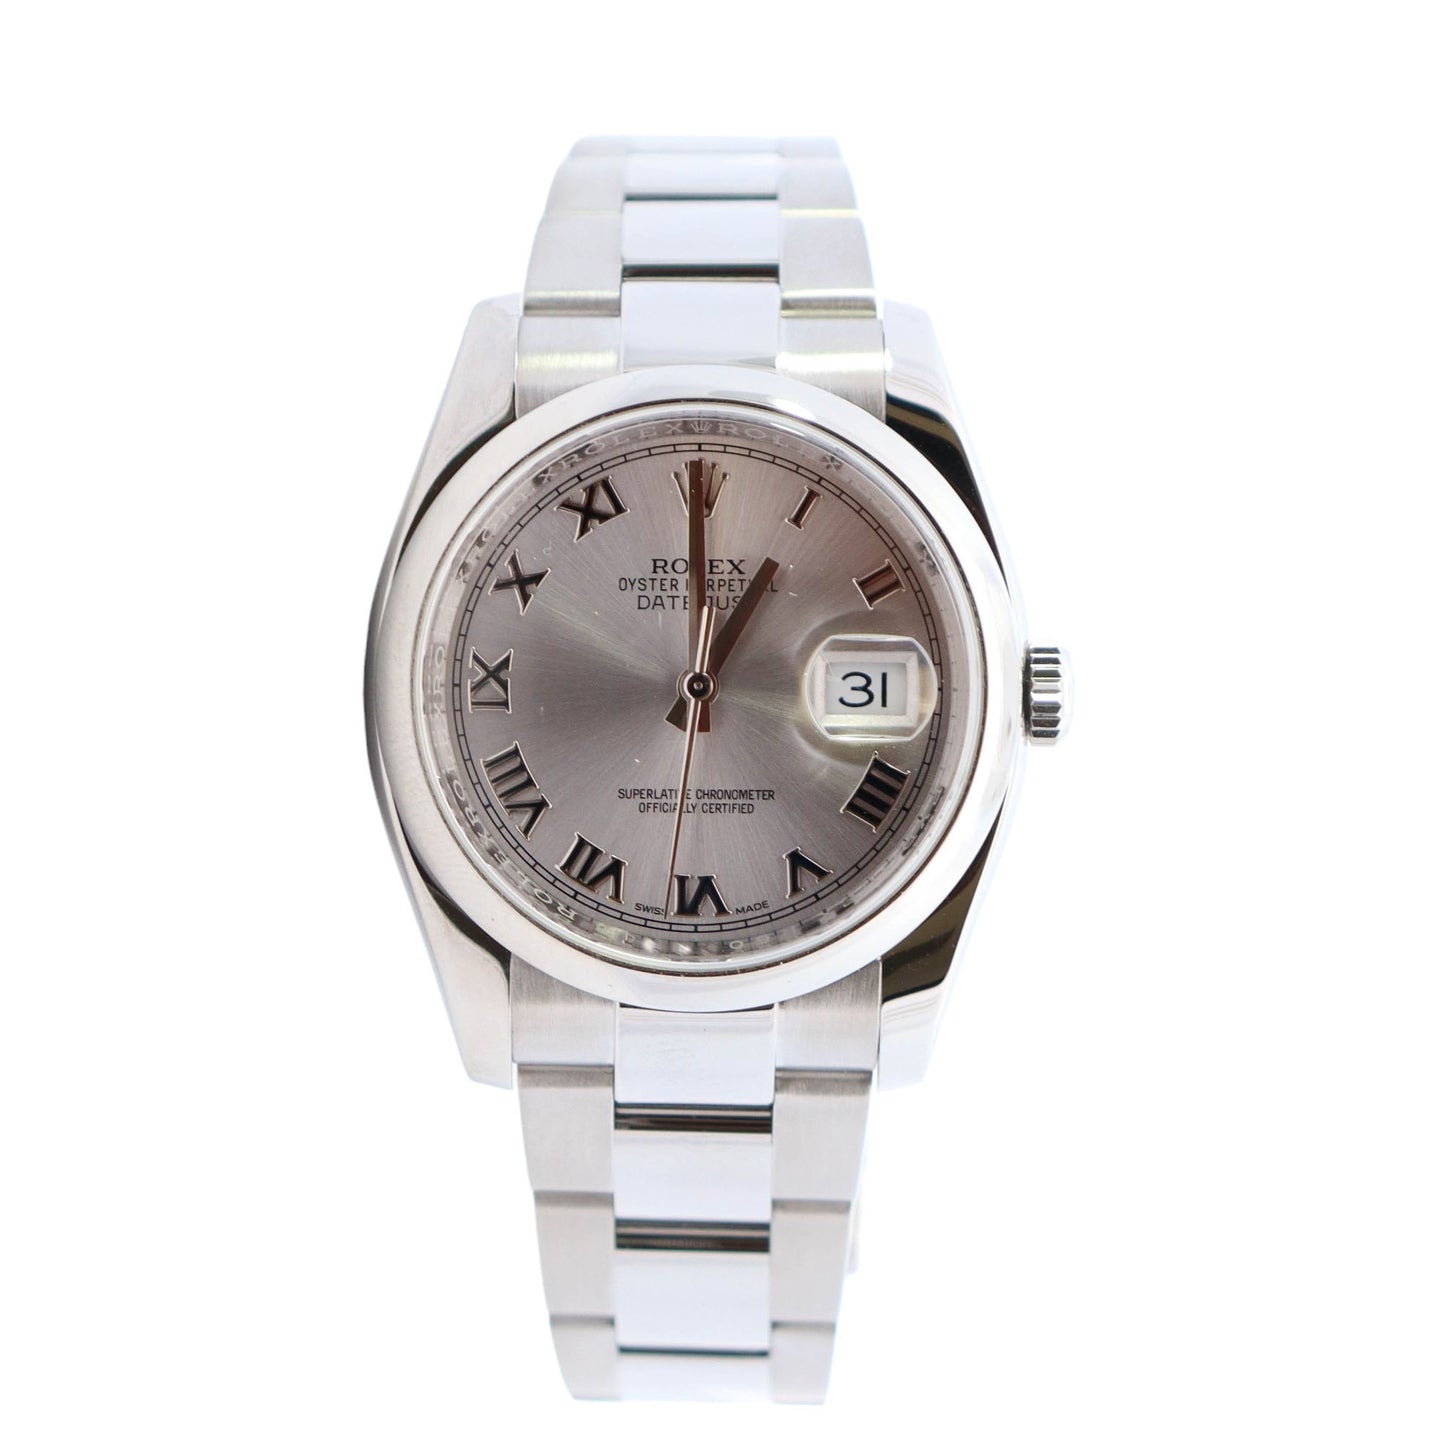 Rolex Datejust Stainless Steel 36mm Silver Roman Dial Watch Reference #: 116200